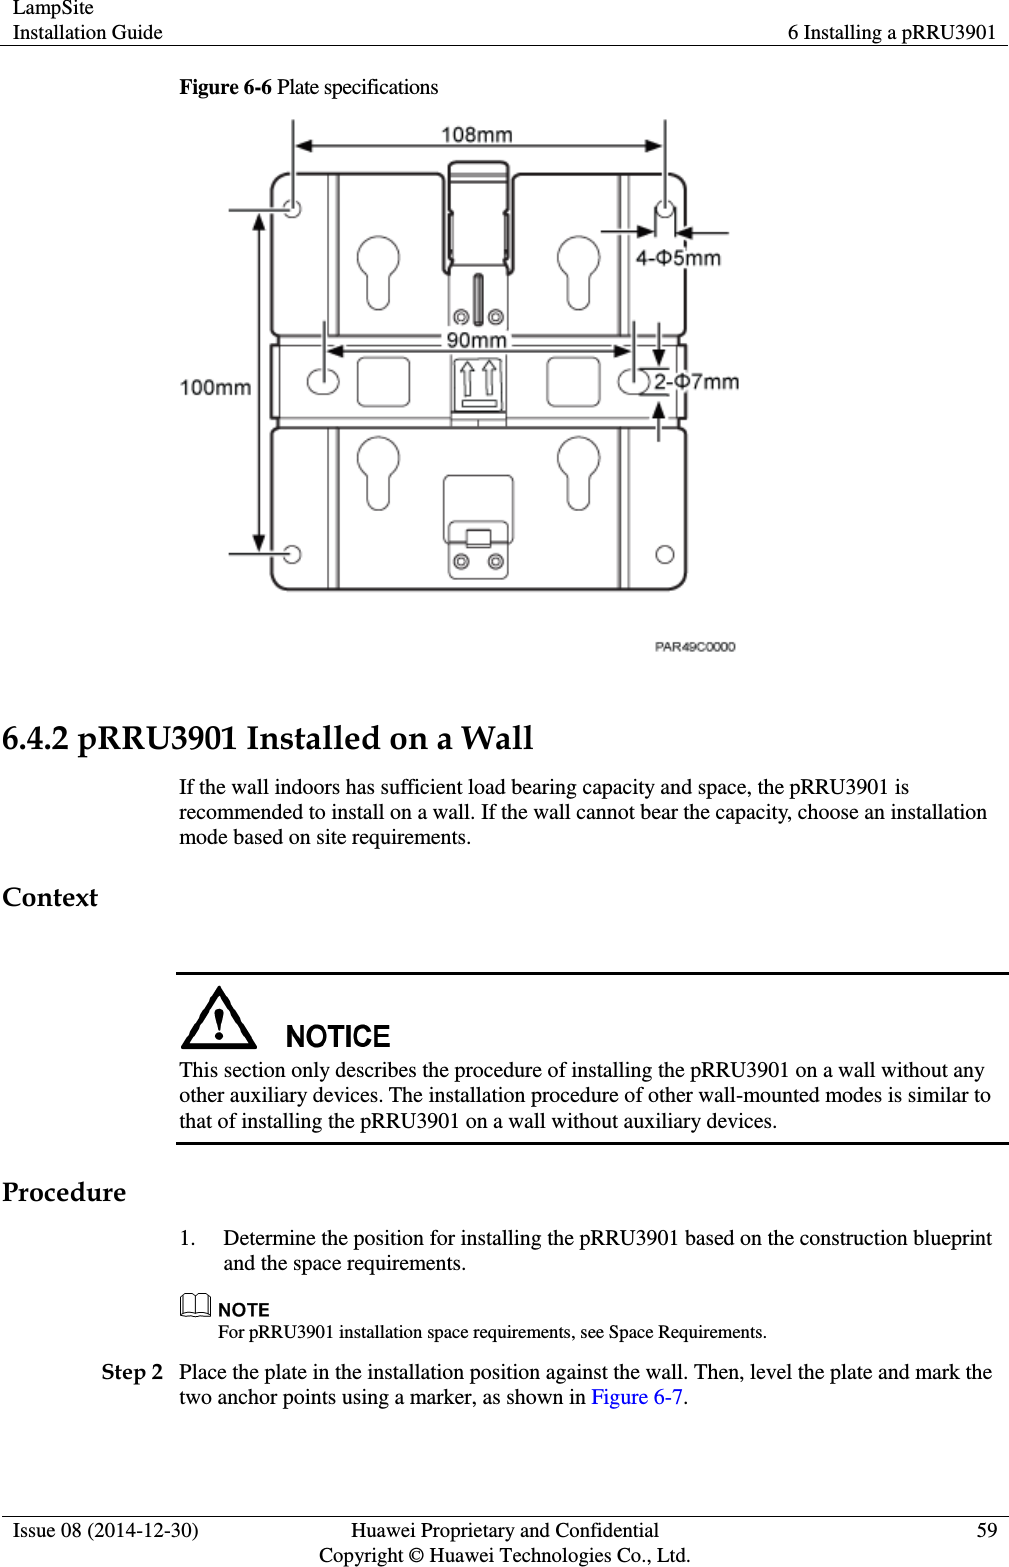 LampSite Installation Guide 6 Installing a pRRU3901  Issue 08 (2014-12-30) Huawei Proprietary and Confidential                                     Copyright © Huawei Technologies Co., Ltd. 59  Figure 6-6 Plate specifications   6.4.2 pRRU3901 Installed on a Wall If the wall indoors has sufficient load bearing capacity and space, the pRRU3901 is recommended to install on a wall. If the wall cannot bear the capacity, choose an installation mode based on site requirements. Context   This section only describes the procedure of installing the pRRU3901 on a wall without any other auxiliary devices. The installation procedure of other wall-mounted modes is similar to that of installing the pRRU3901 on a wall without auxiliary devices. Procedure 1. Determine the position for installing the pRRU3901 based on the construction blueprint and the space requirements.  For pRRU3901 installation space requirements, see Space Requirements. Step 2 Place the plate in the installation position against the wall. Then, level the plate and mark the two anchor points using a marker, as shown in Figure 6-7. 